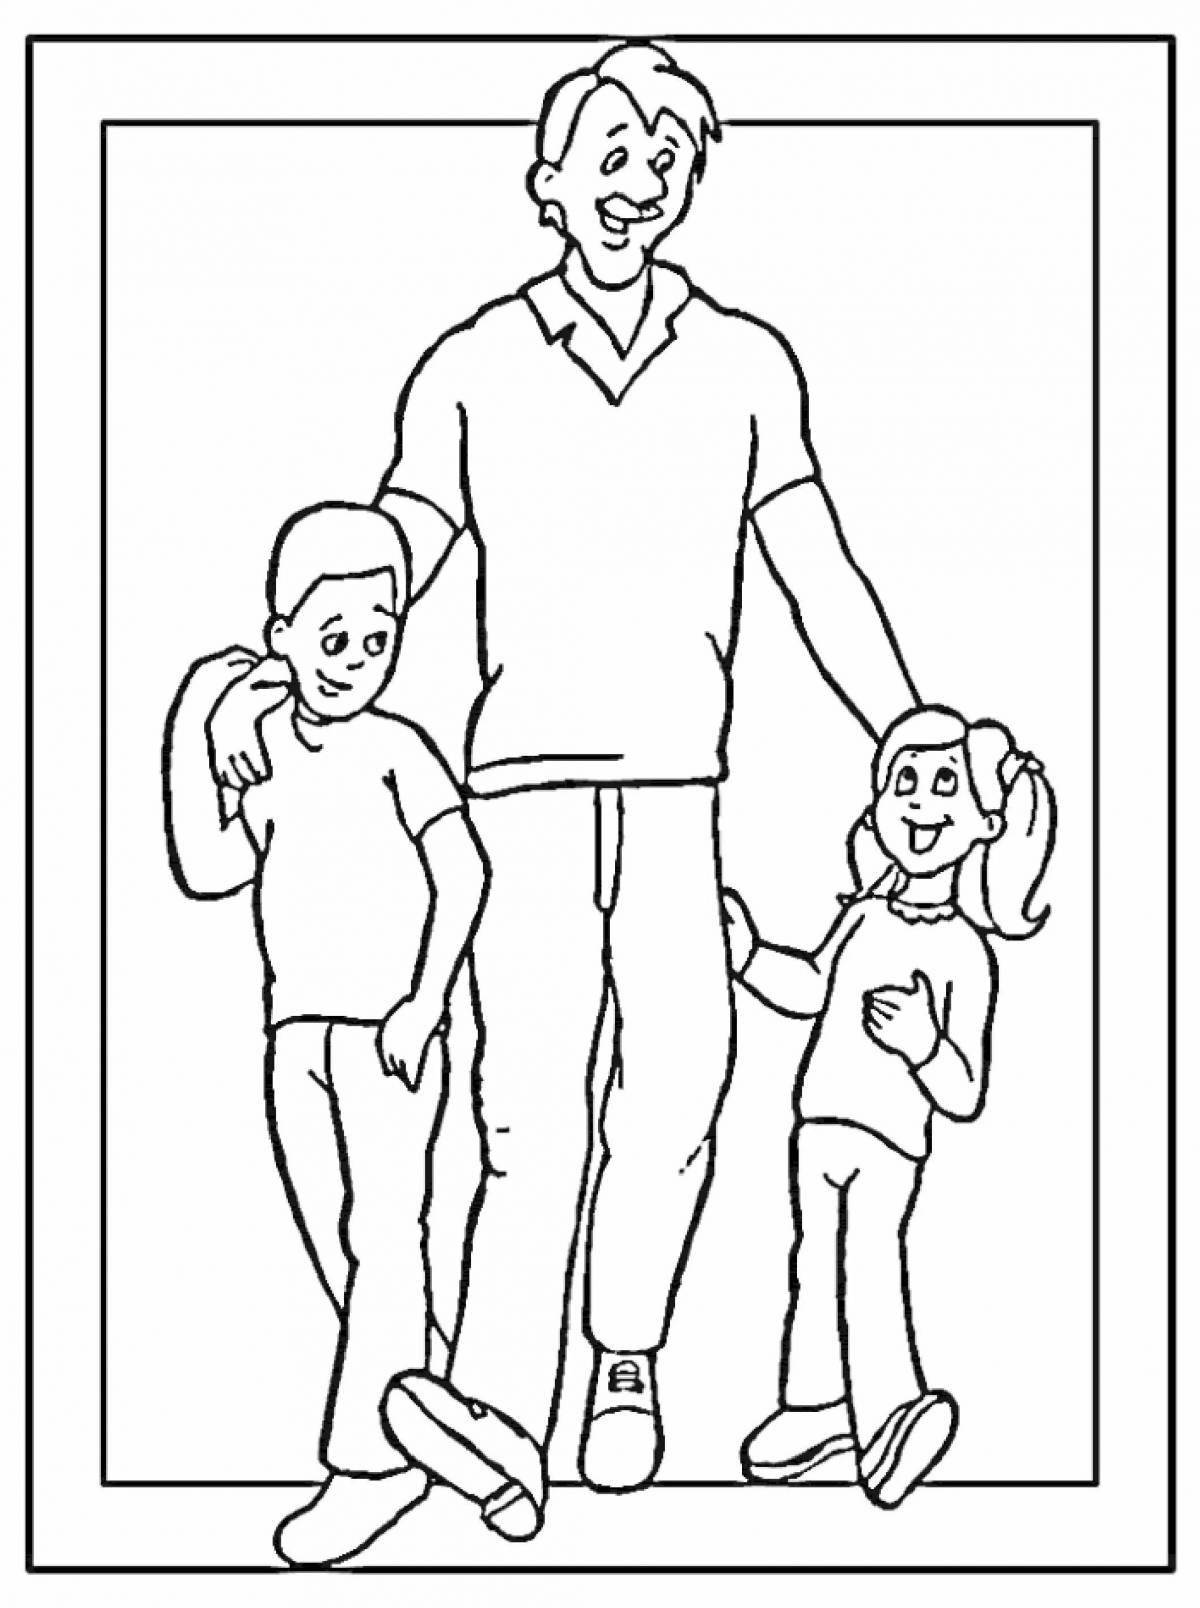 Glitter coloring book for dad for dad's day